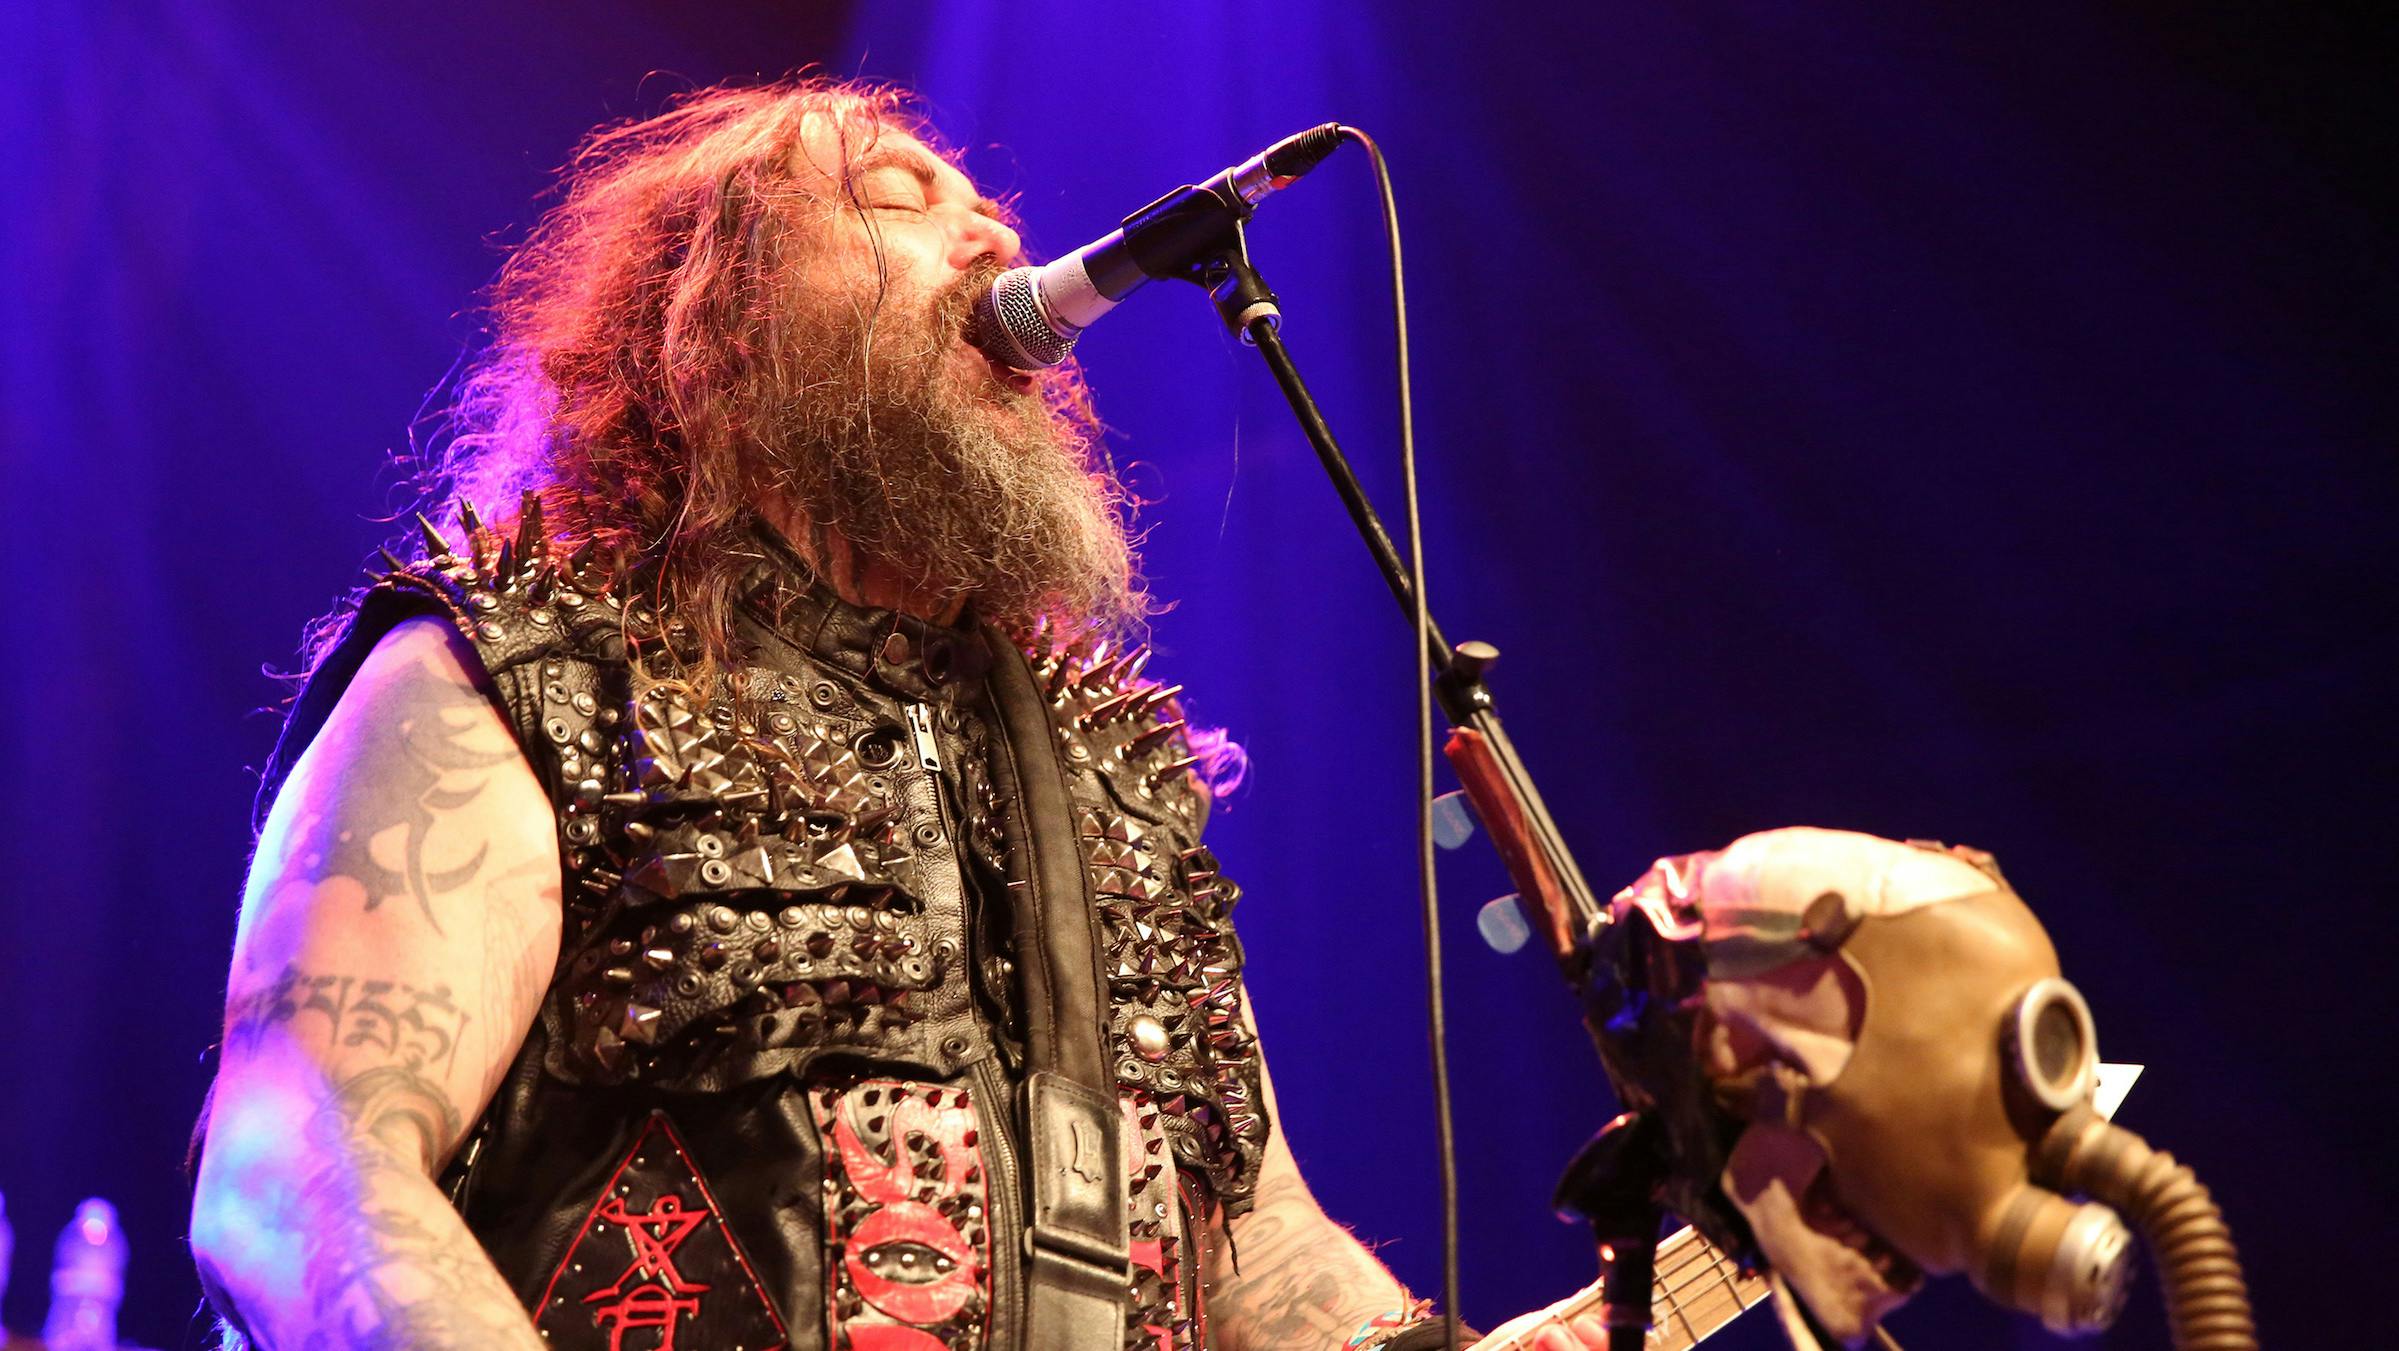 Soulfly Bring A Storm Of Metal Positivity To NYC